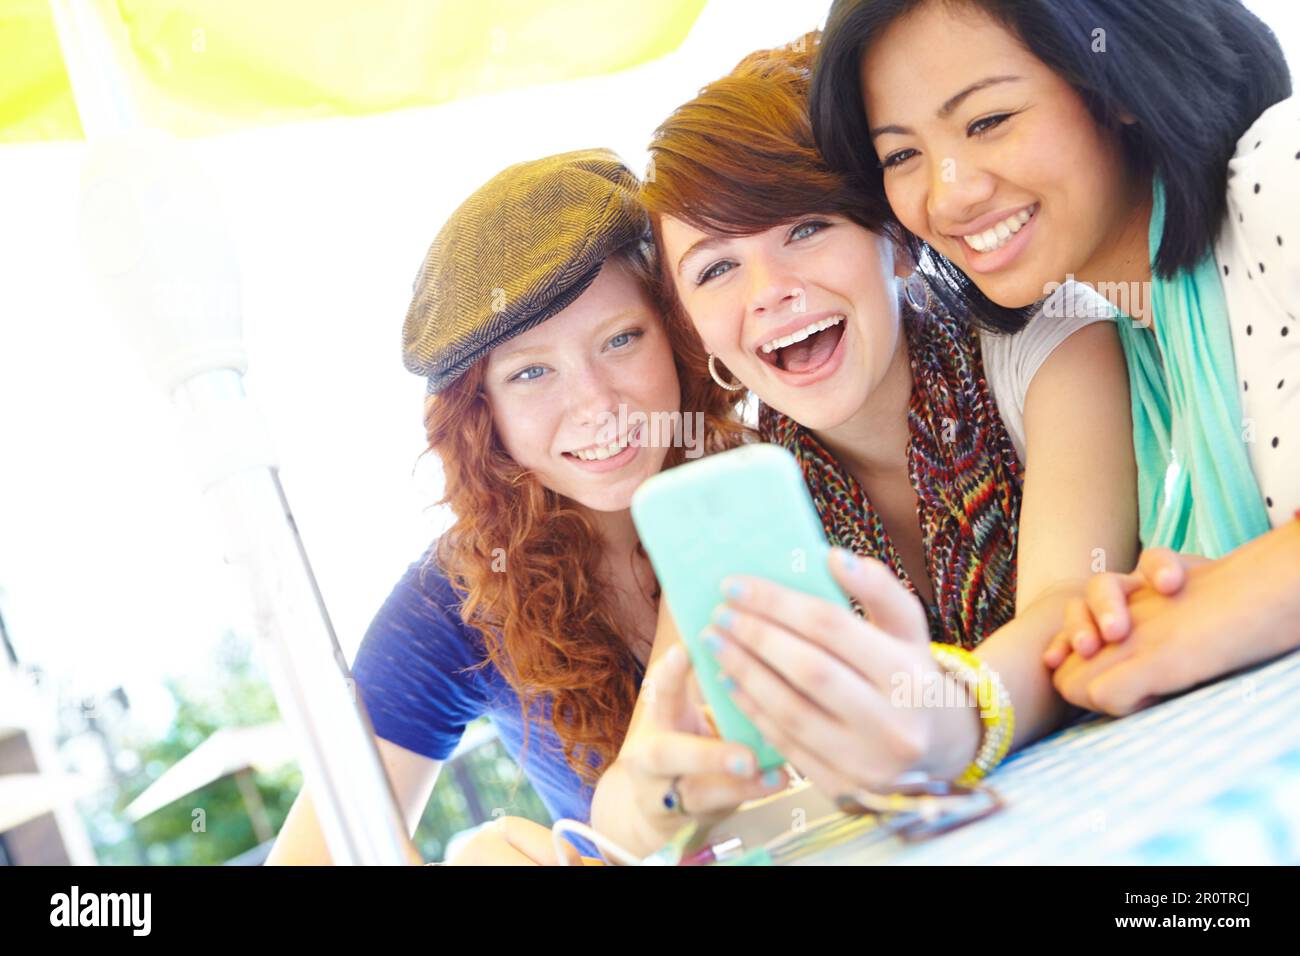 Technological fun. A group of adolescent girls laughing as they look at something on a smartphone screen. Stock Photo